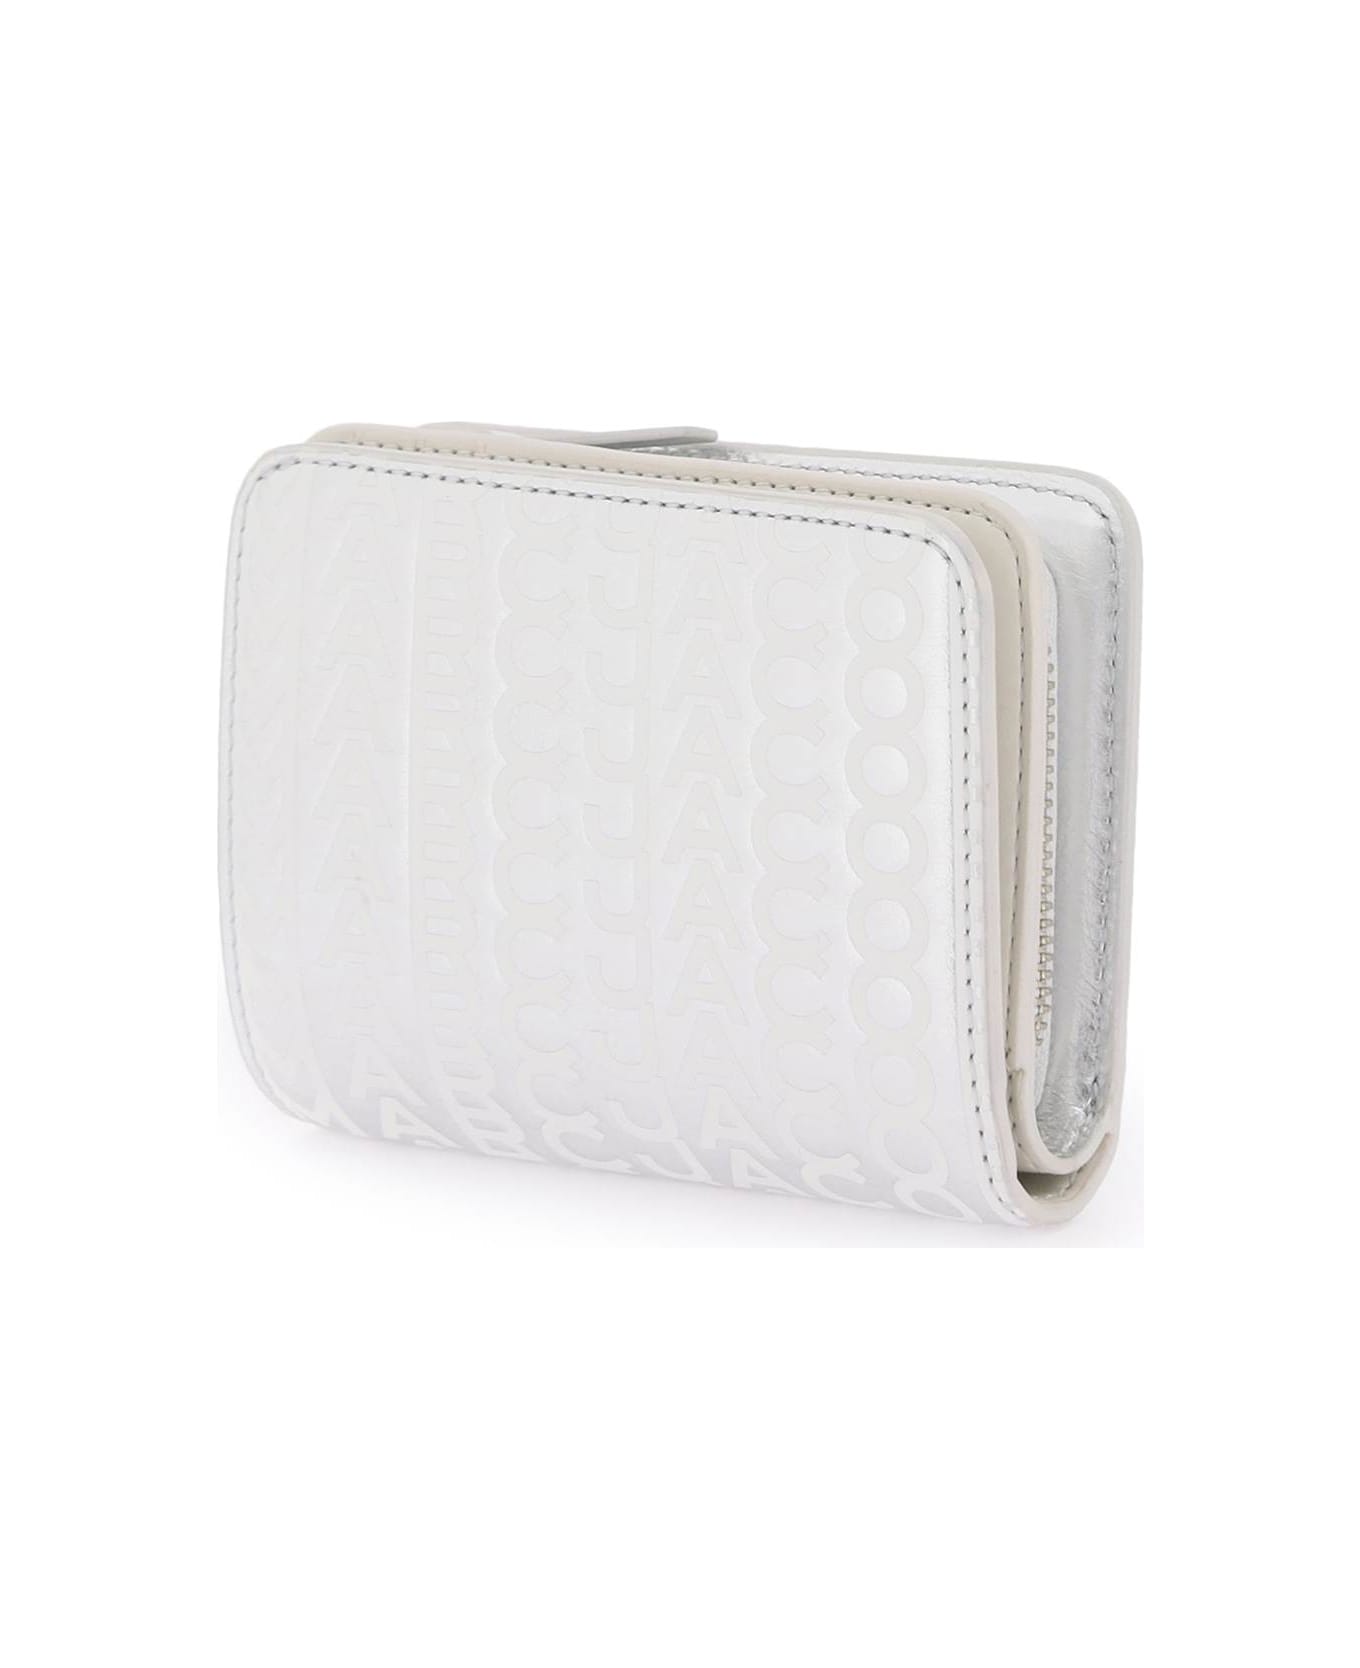 Marc Jacobs Compact Wallet - SILVER BRIGHT WHITE